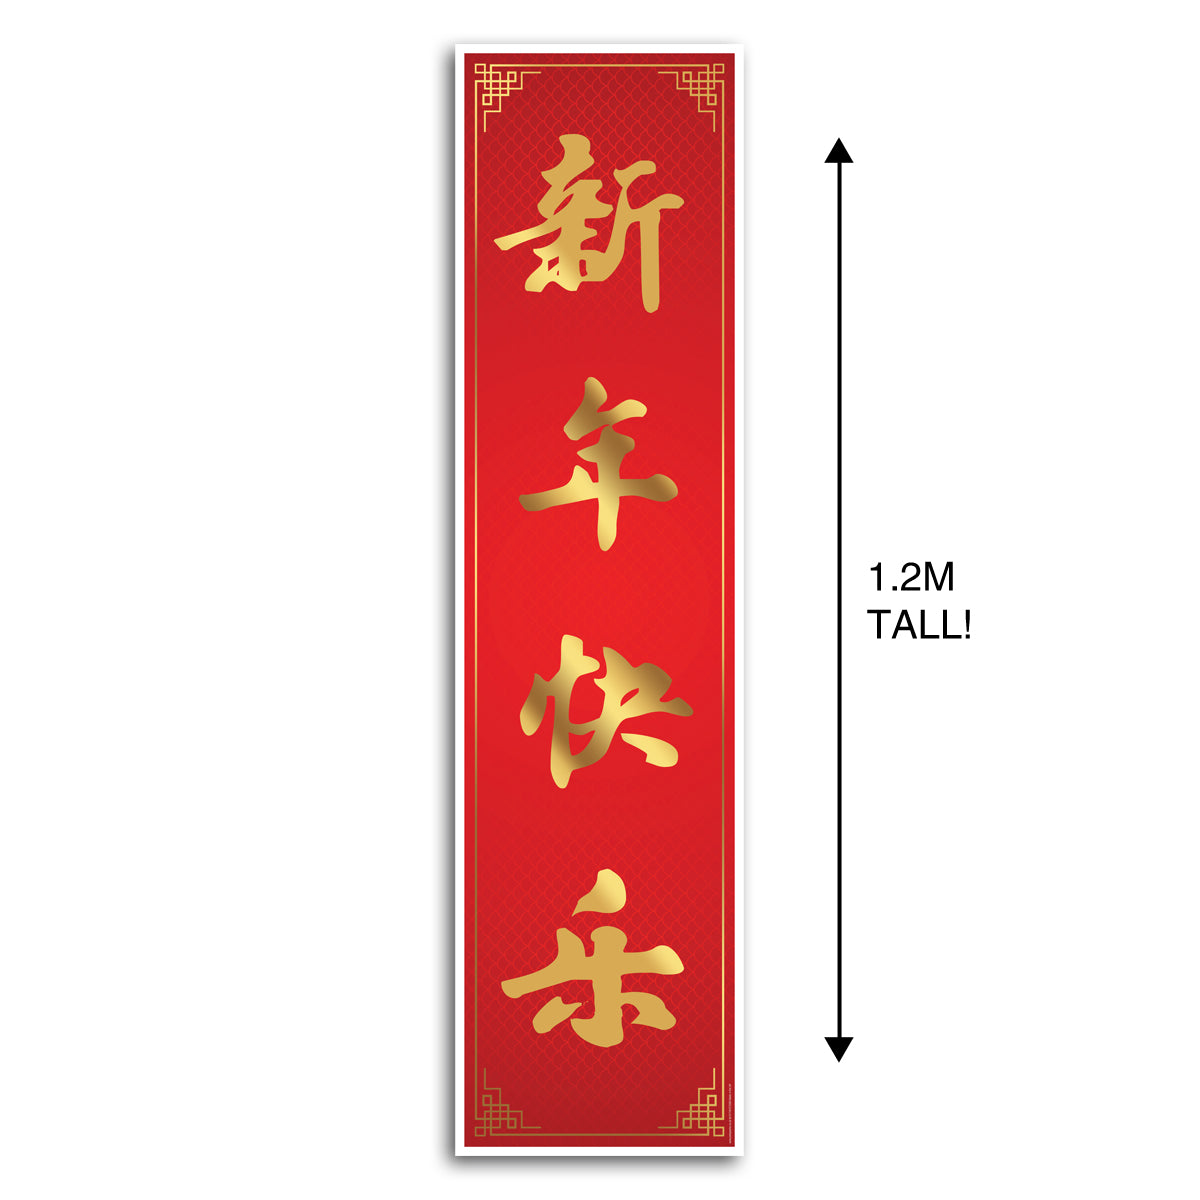 Chinese New Year "Happy New Year" Calligraphy Portrait Wall & Door Banner Decoration - 1.2m